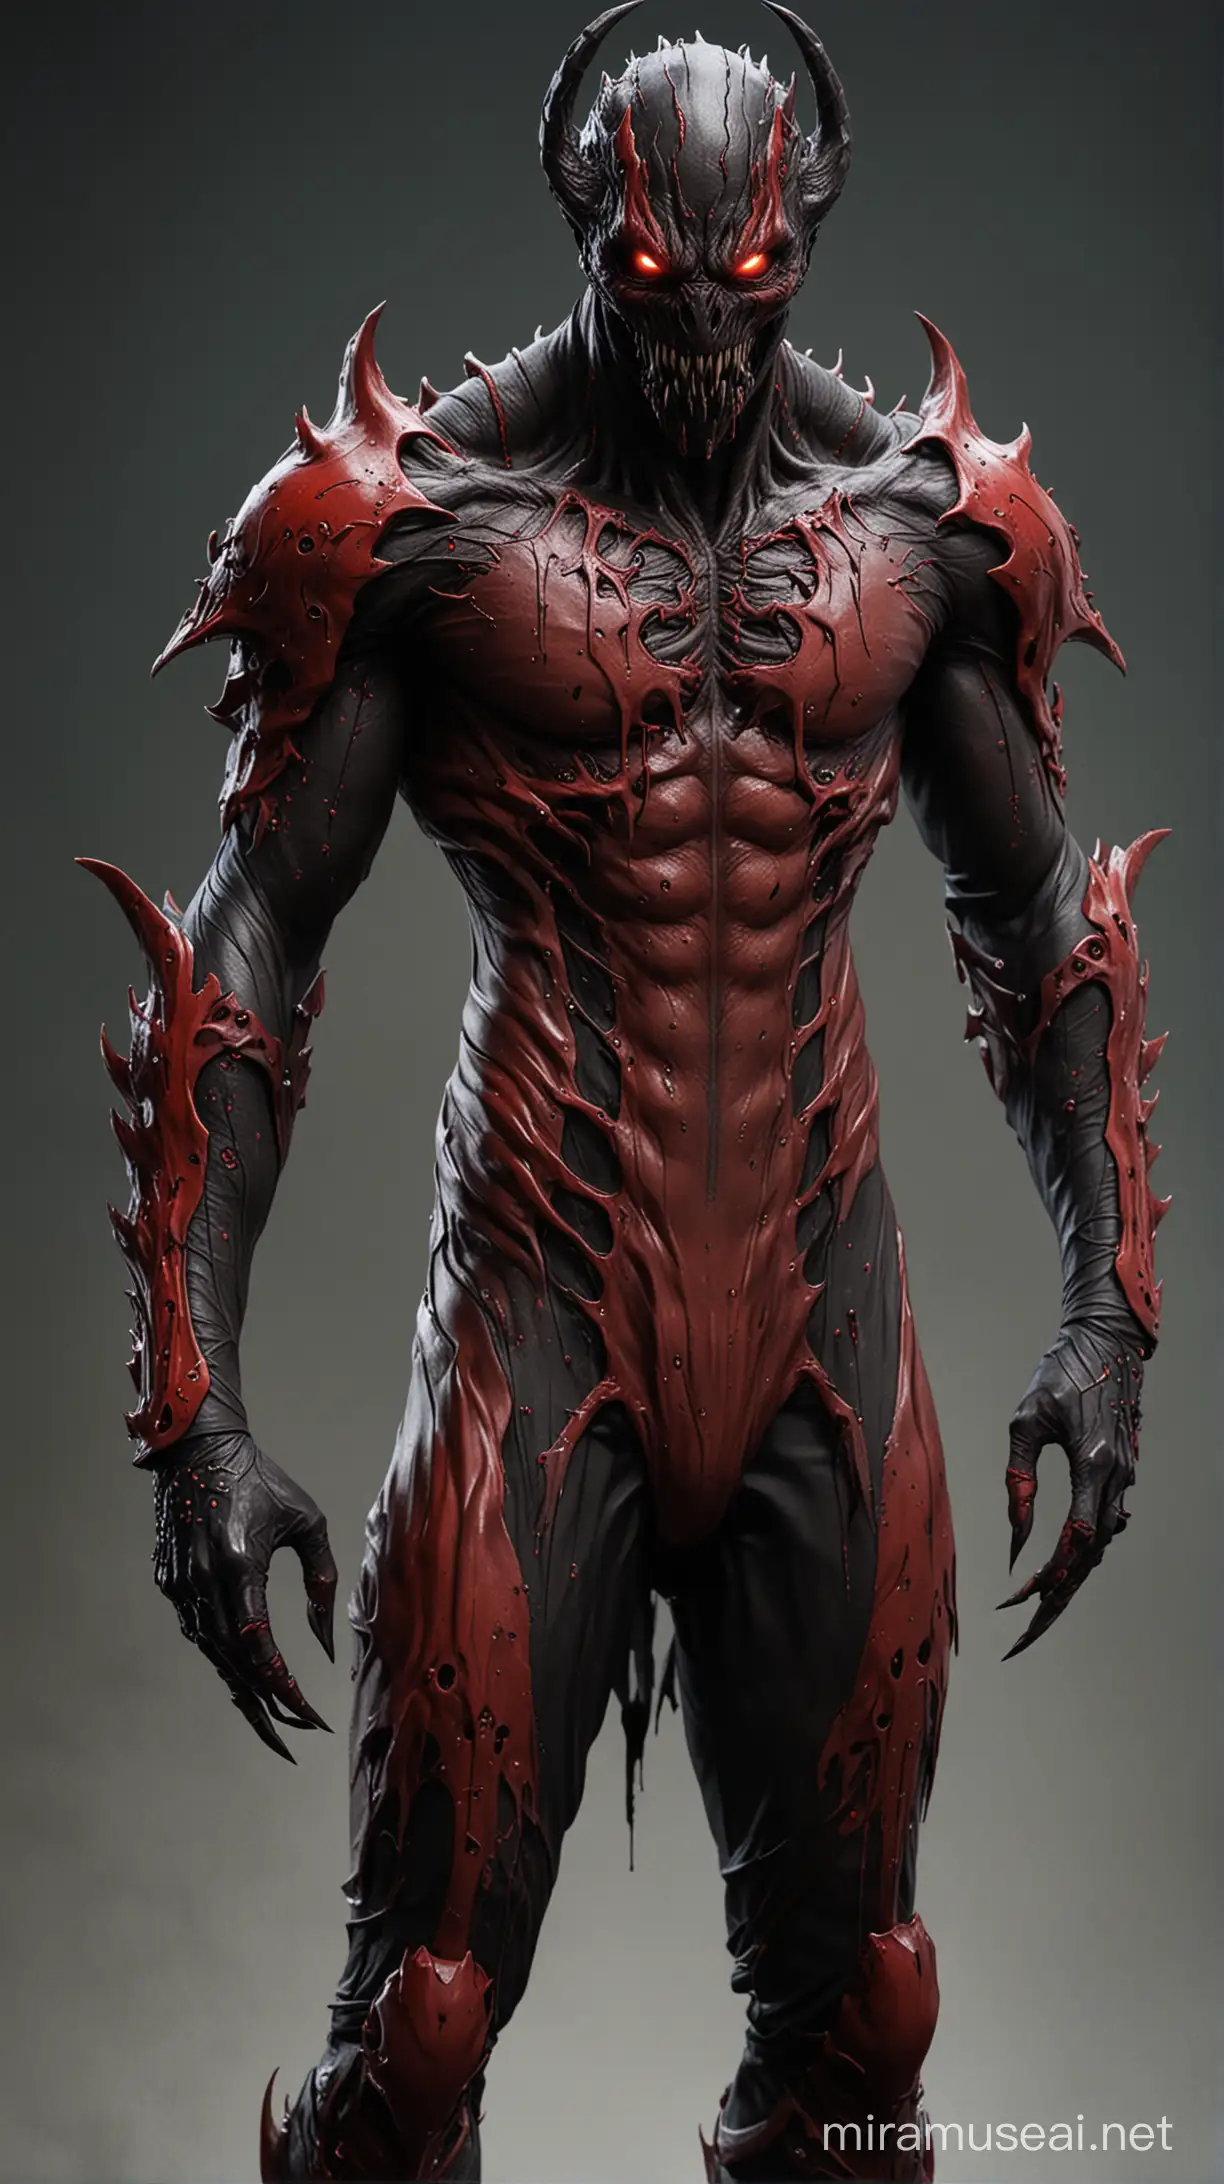 A long demon suit for gaming character with horror eyes made on the suit and claws with blood made on the suit of red colour